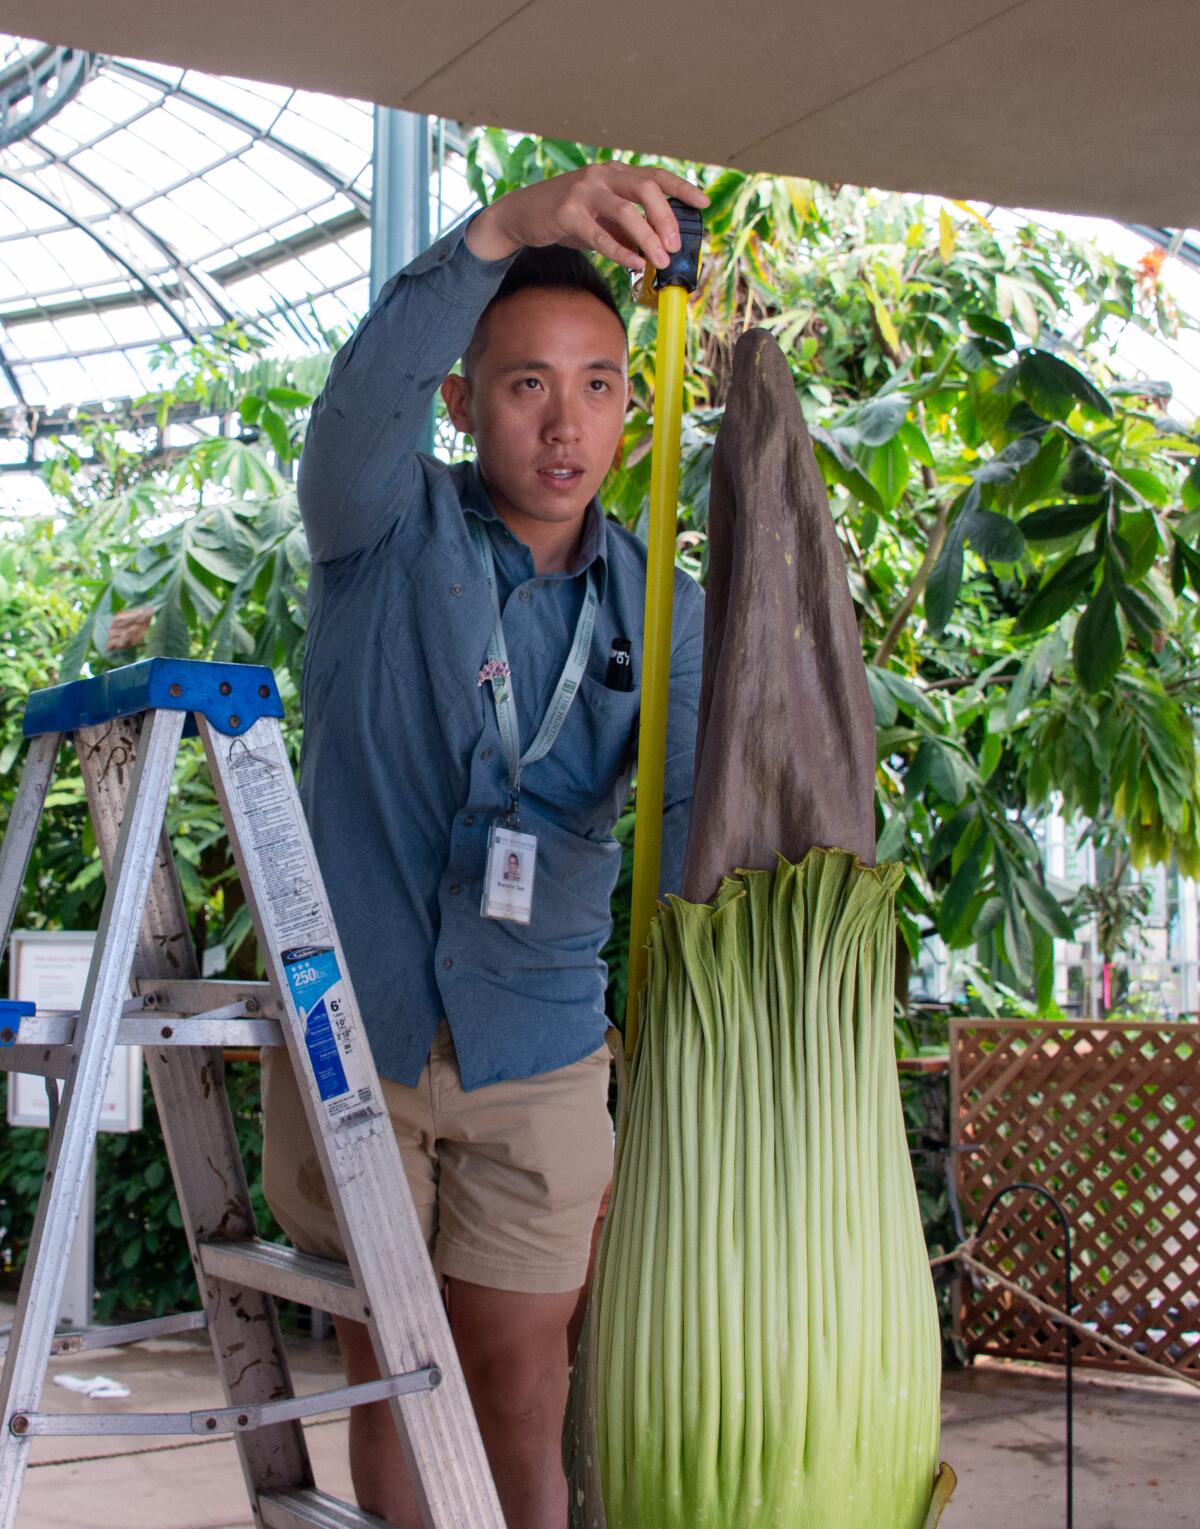 A green-and-brown corpse flower stands tall with other plants in the background